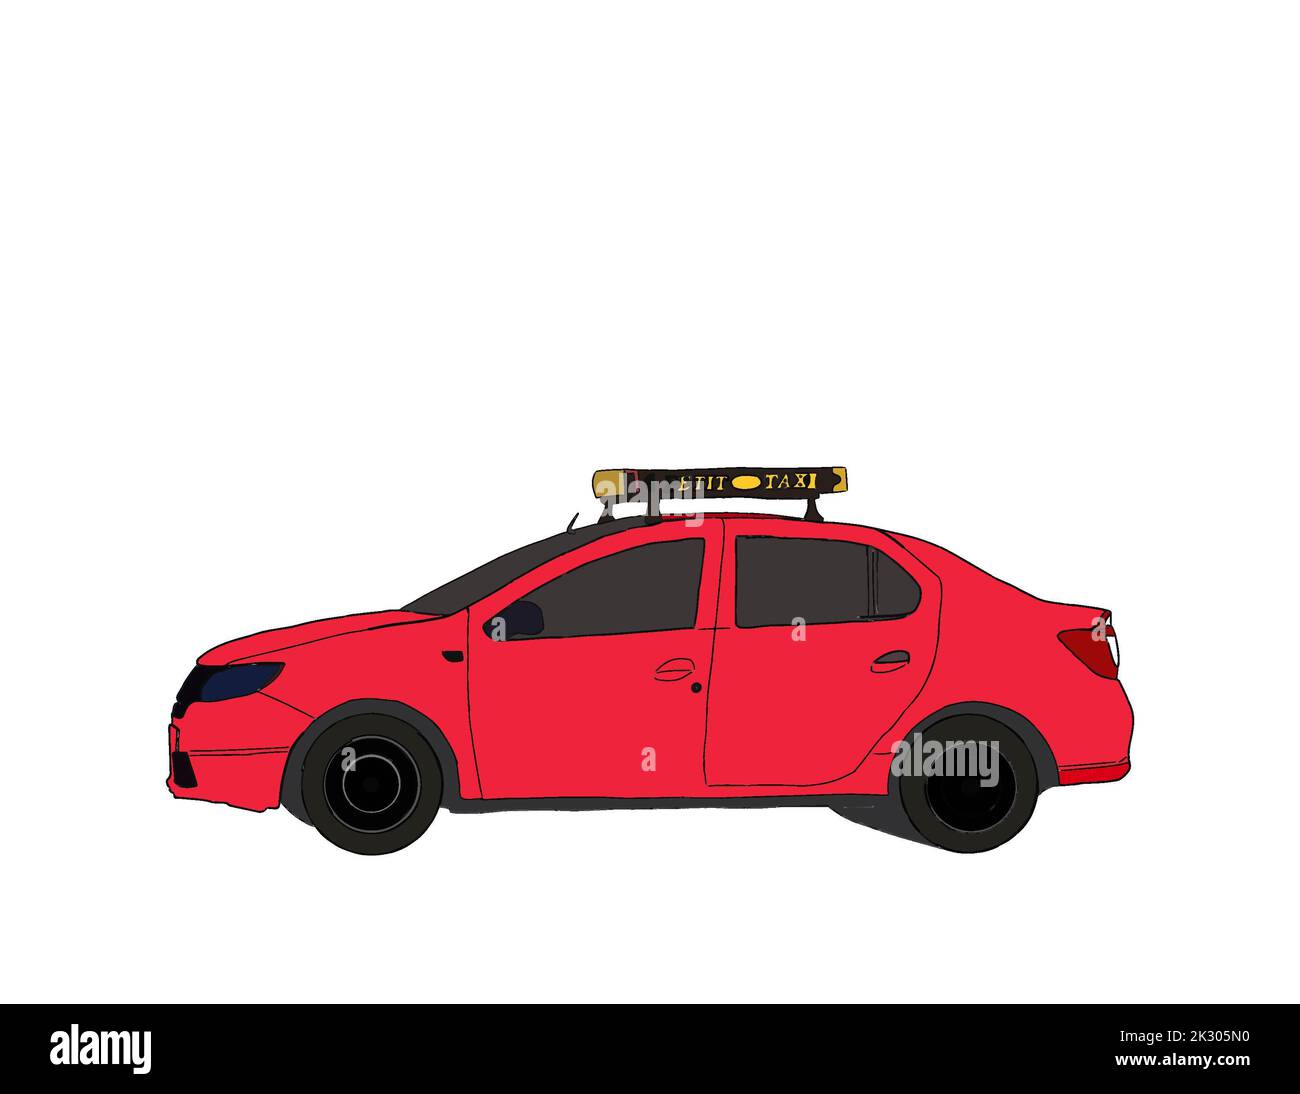 Moroccan Red Taxi Illustration on White Background. Stock Photo